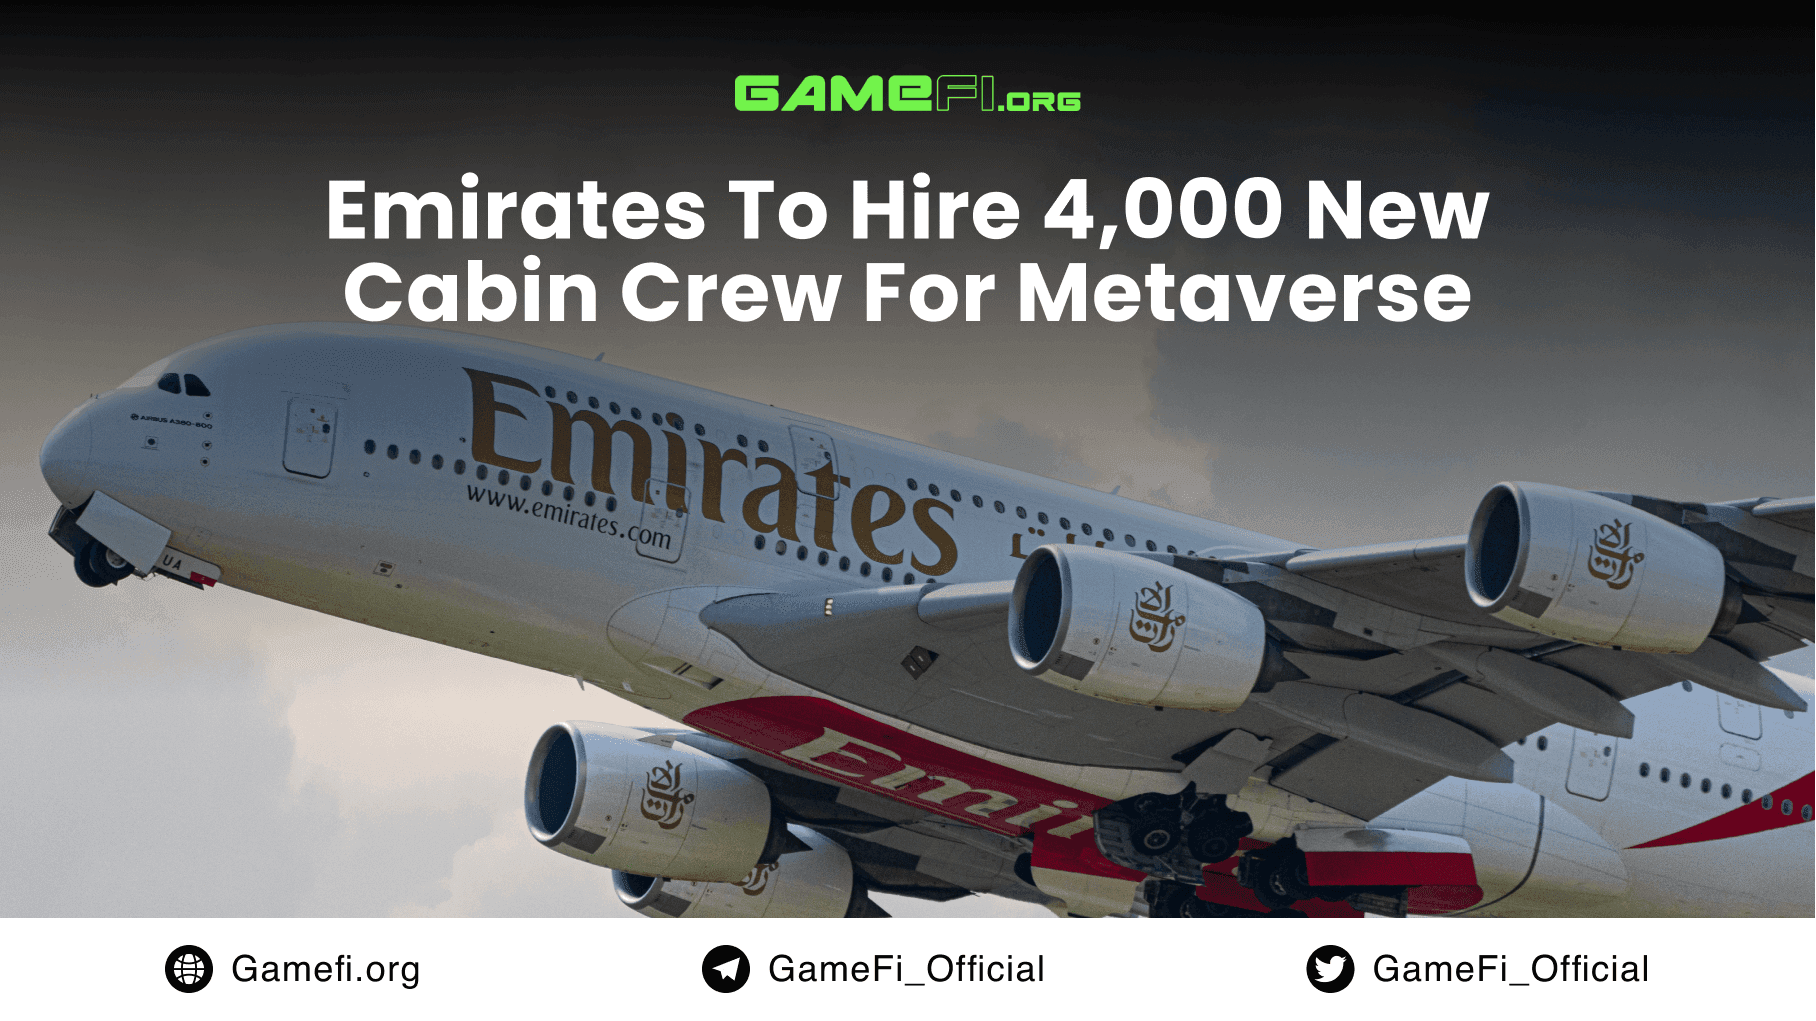 Emirates to Hire 4,000 New Cabin Crew to Train for the Metaverse